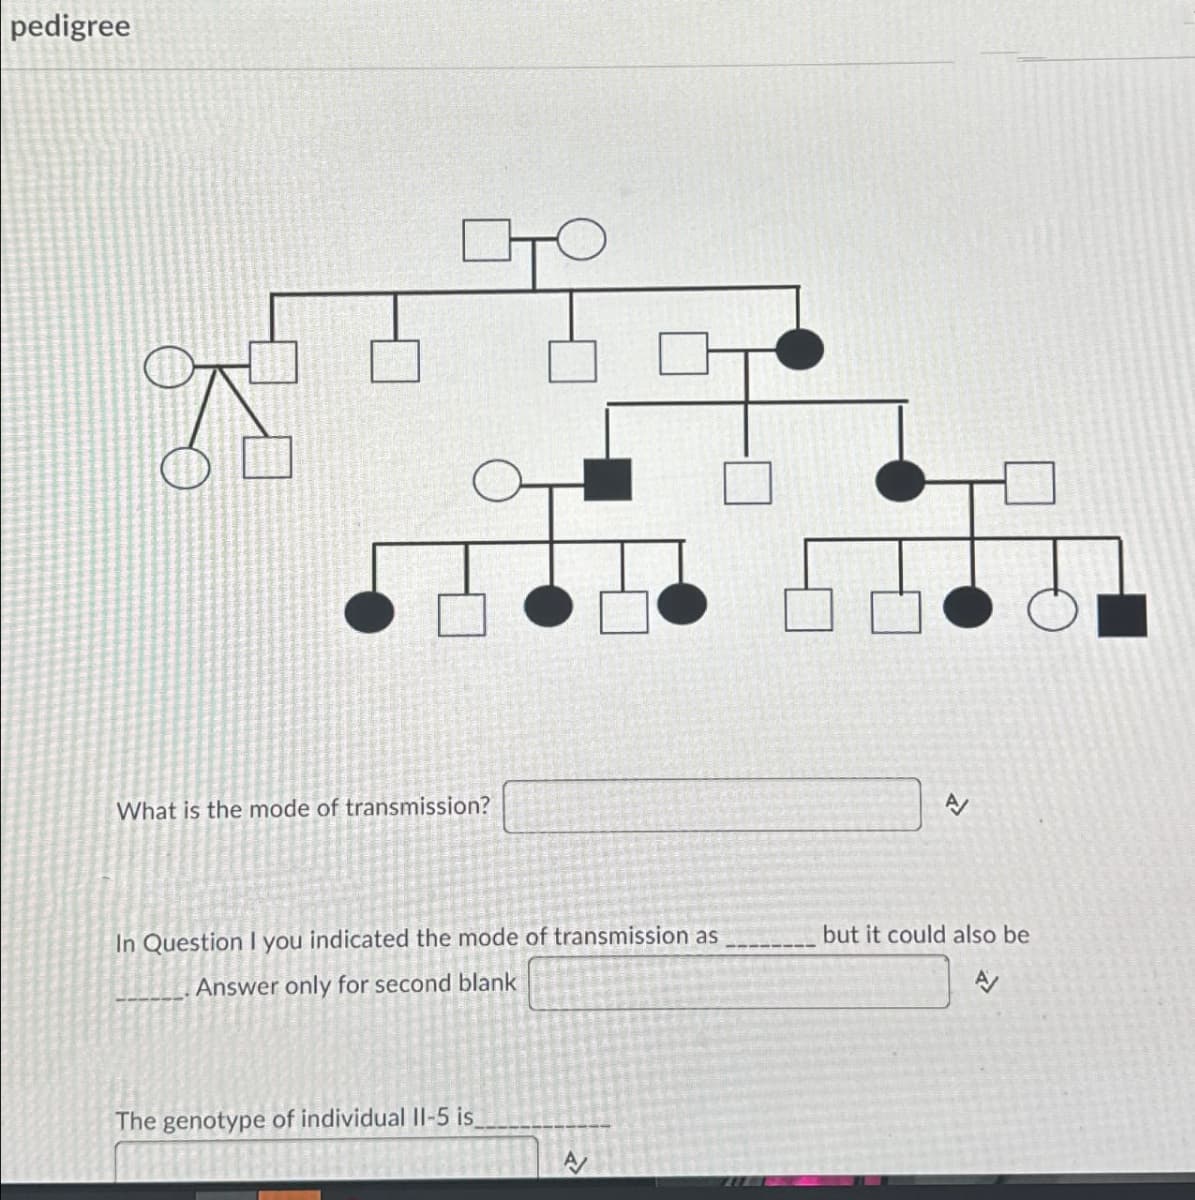 pedigree
What is the mode of transmission?
EV
In Question I you indicated the mode of transmission as
Answer only for second blank
but it could also be
A
The genotype of individual II-5 is
A